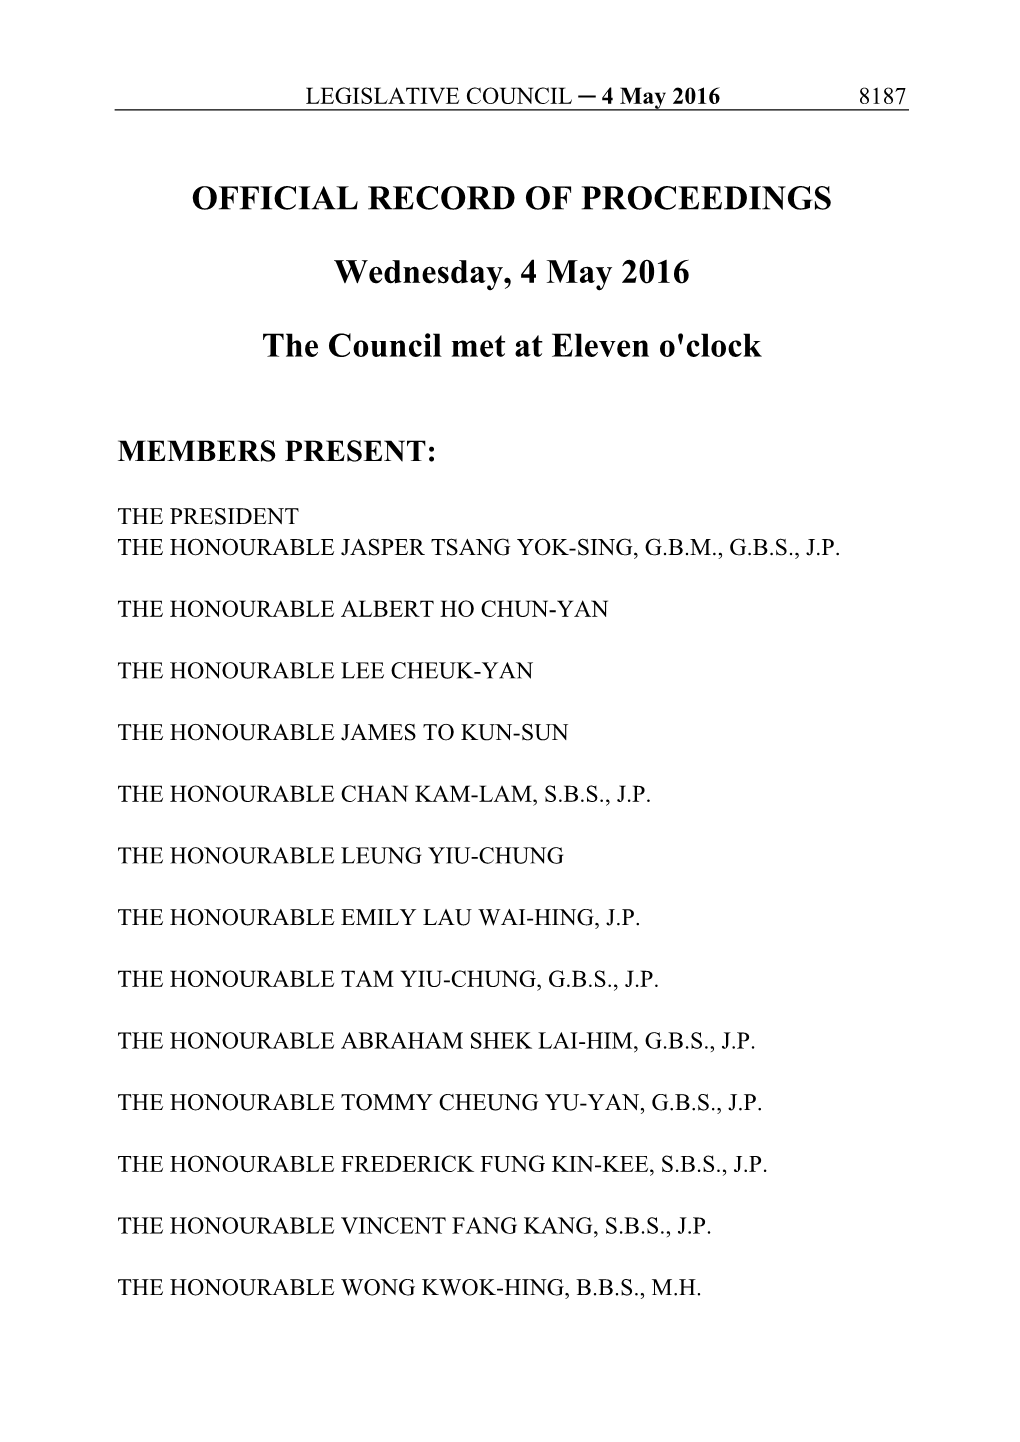 OFFICIAL RECORD of PROCEEDINGS Wednesday, 4